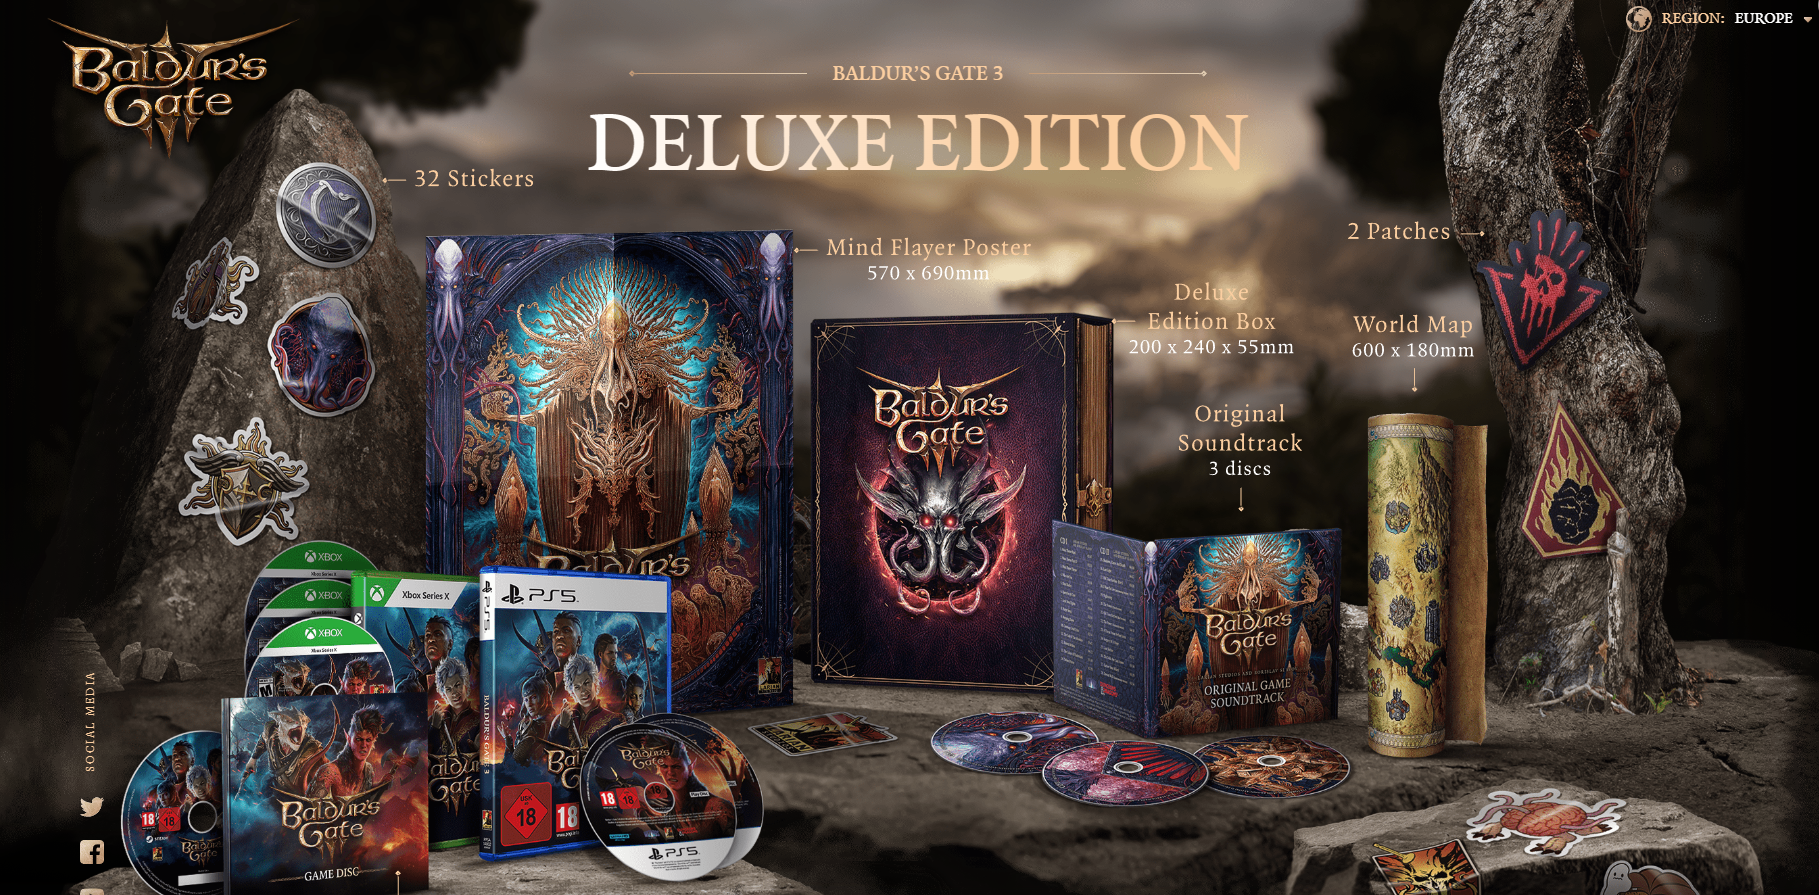 Baldur’s Gate 3 Deluxe Edition Announced for PS5, Xbox & PC